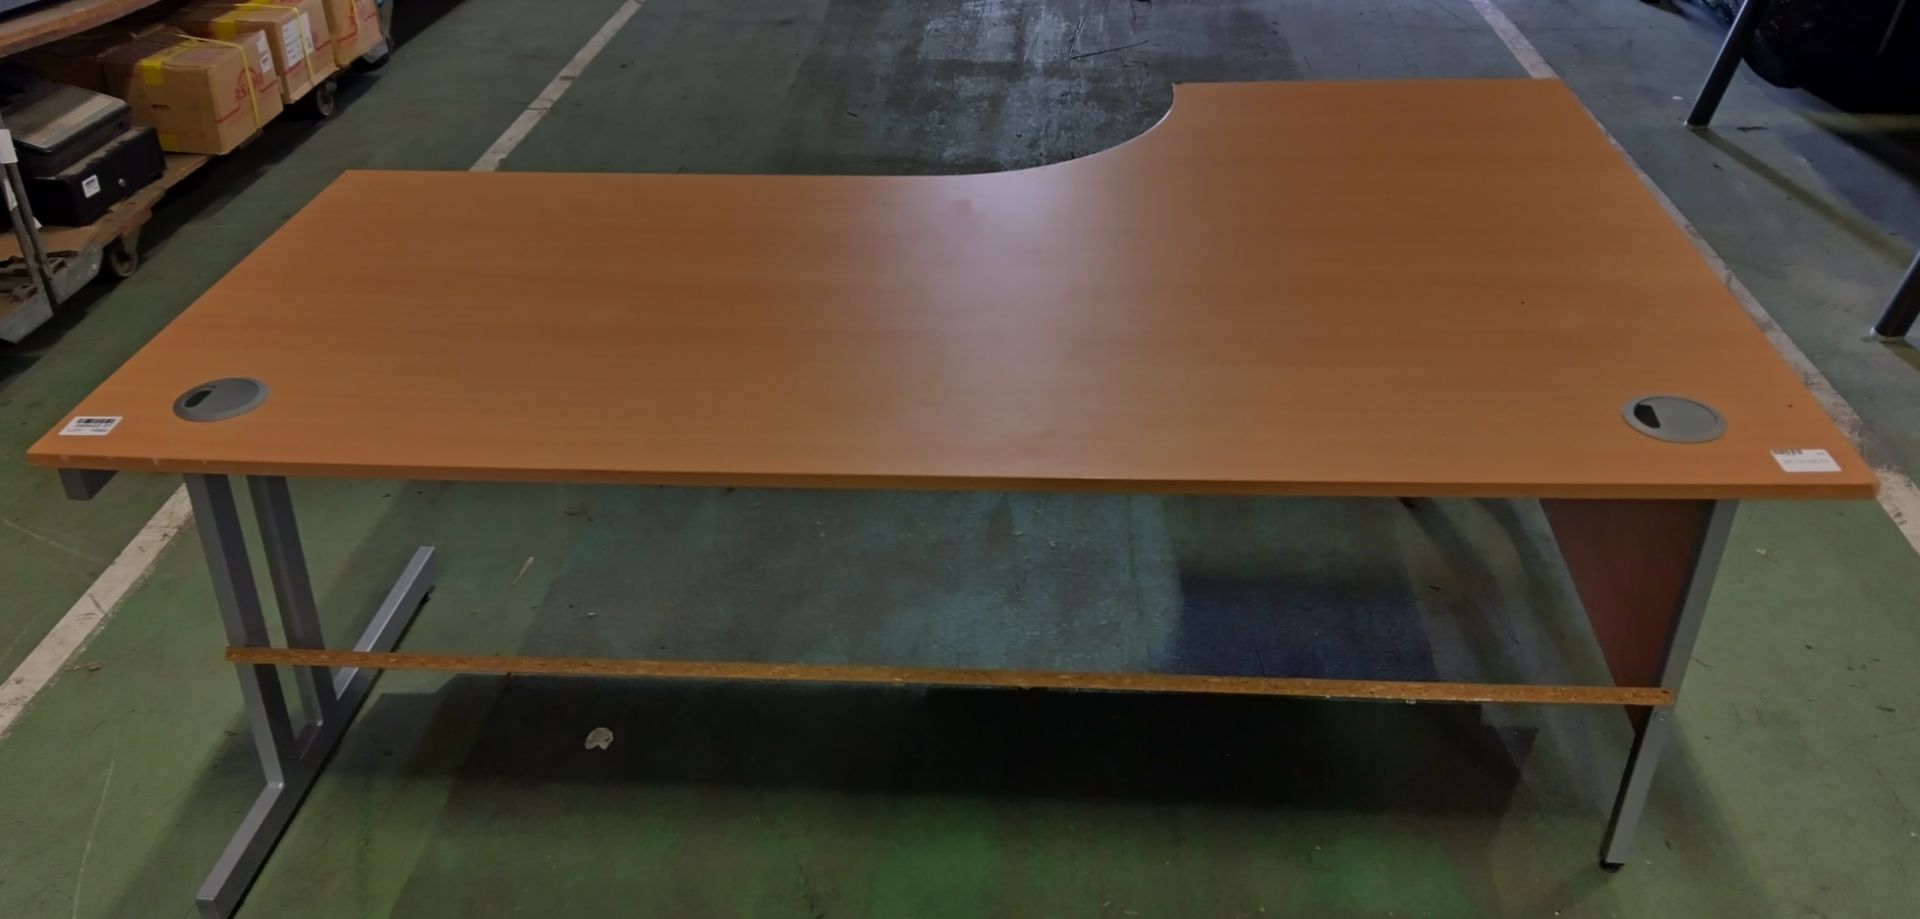 Large curved wooden office scoop desk - L 1800 x W 800 x H 730 - in need of repair